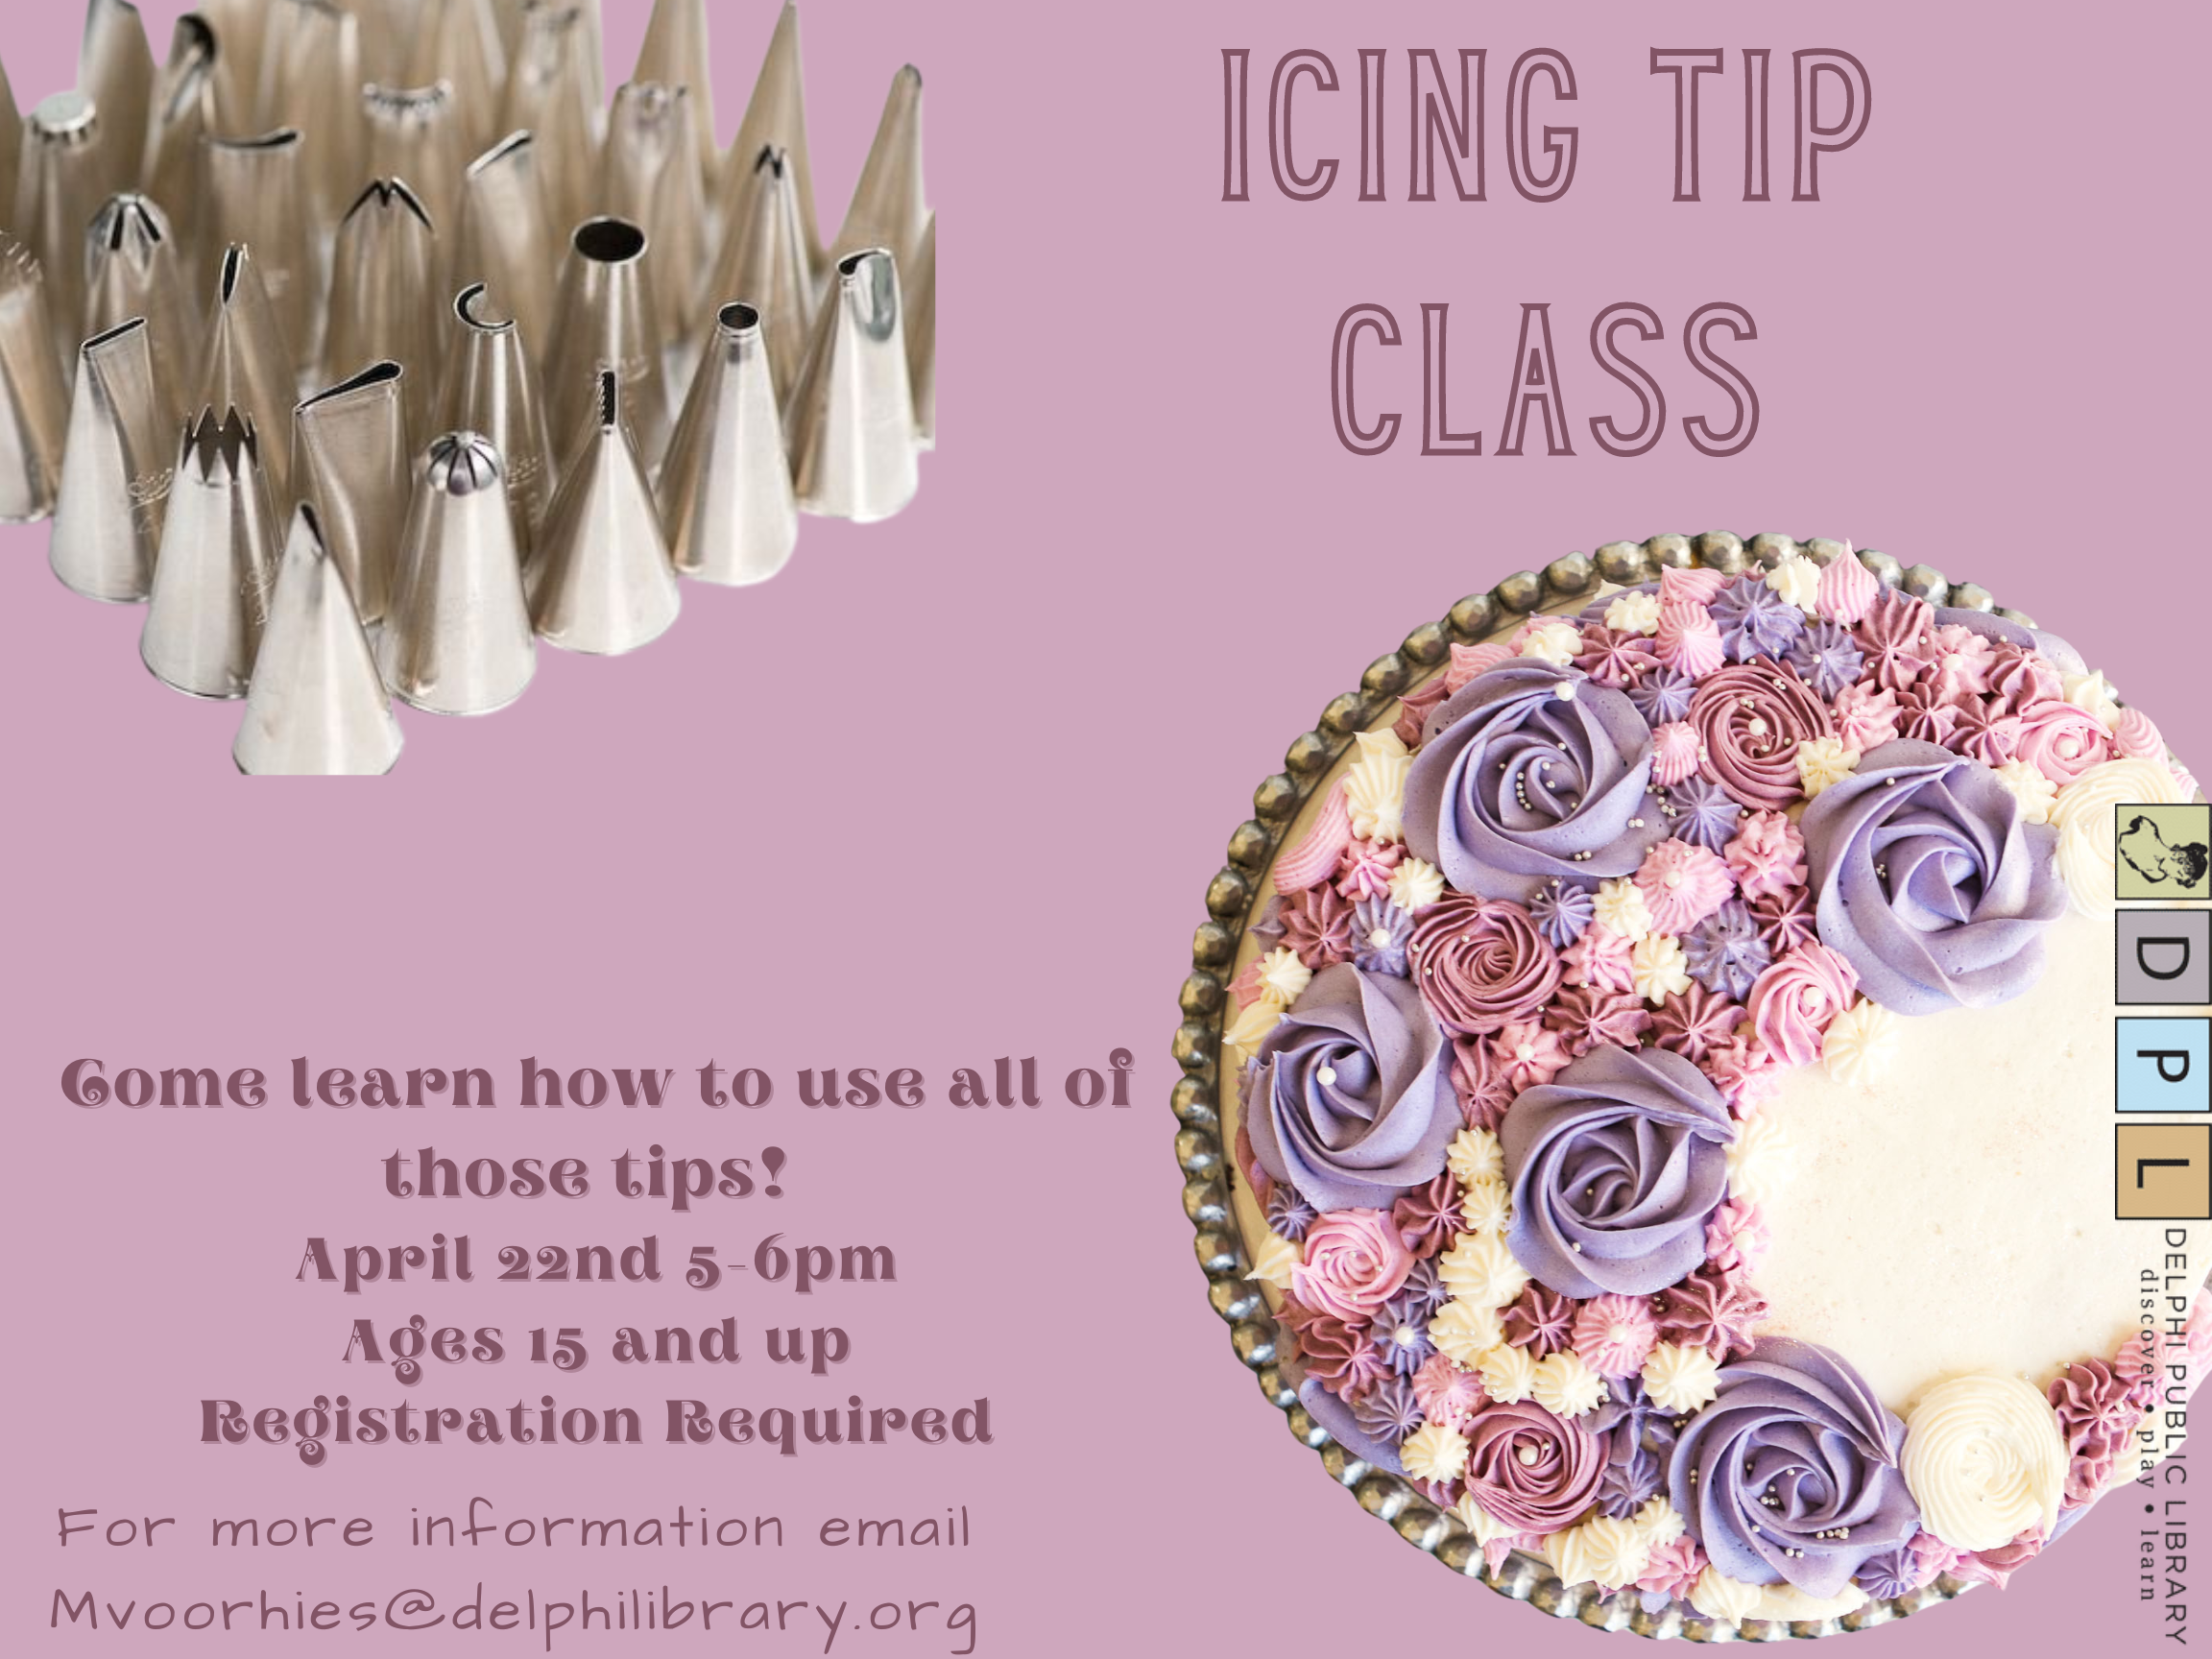 Information about the class along with a decorated cake